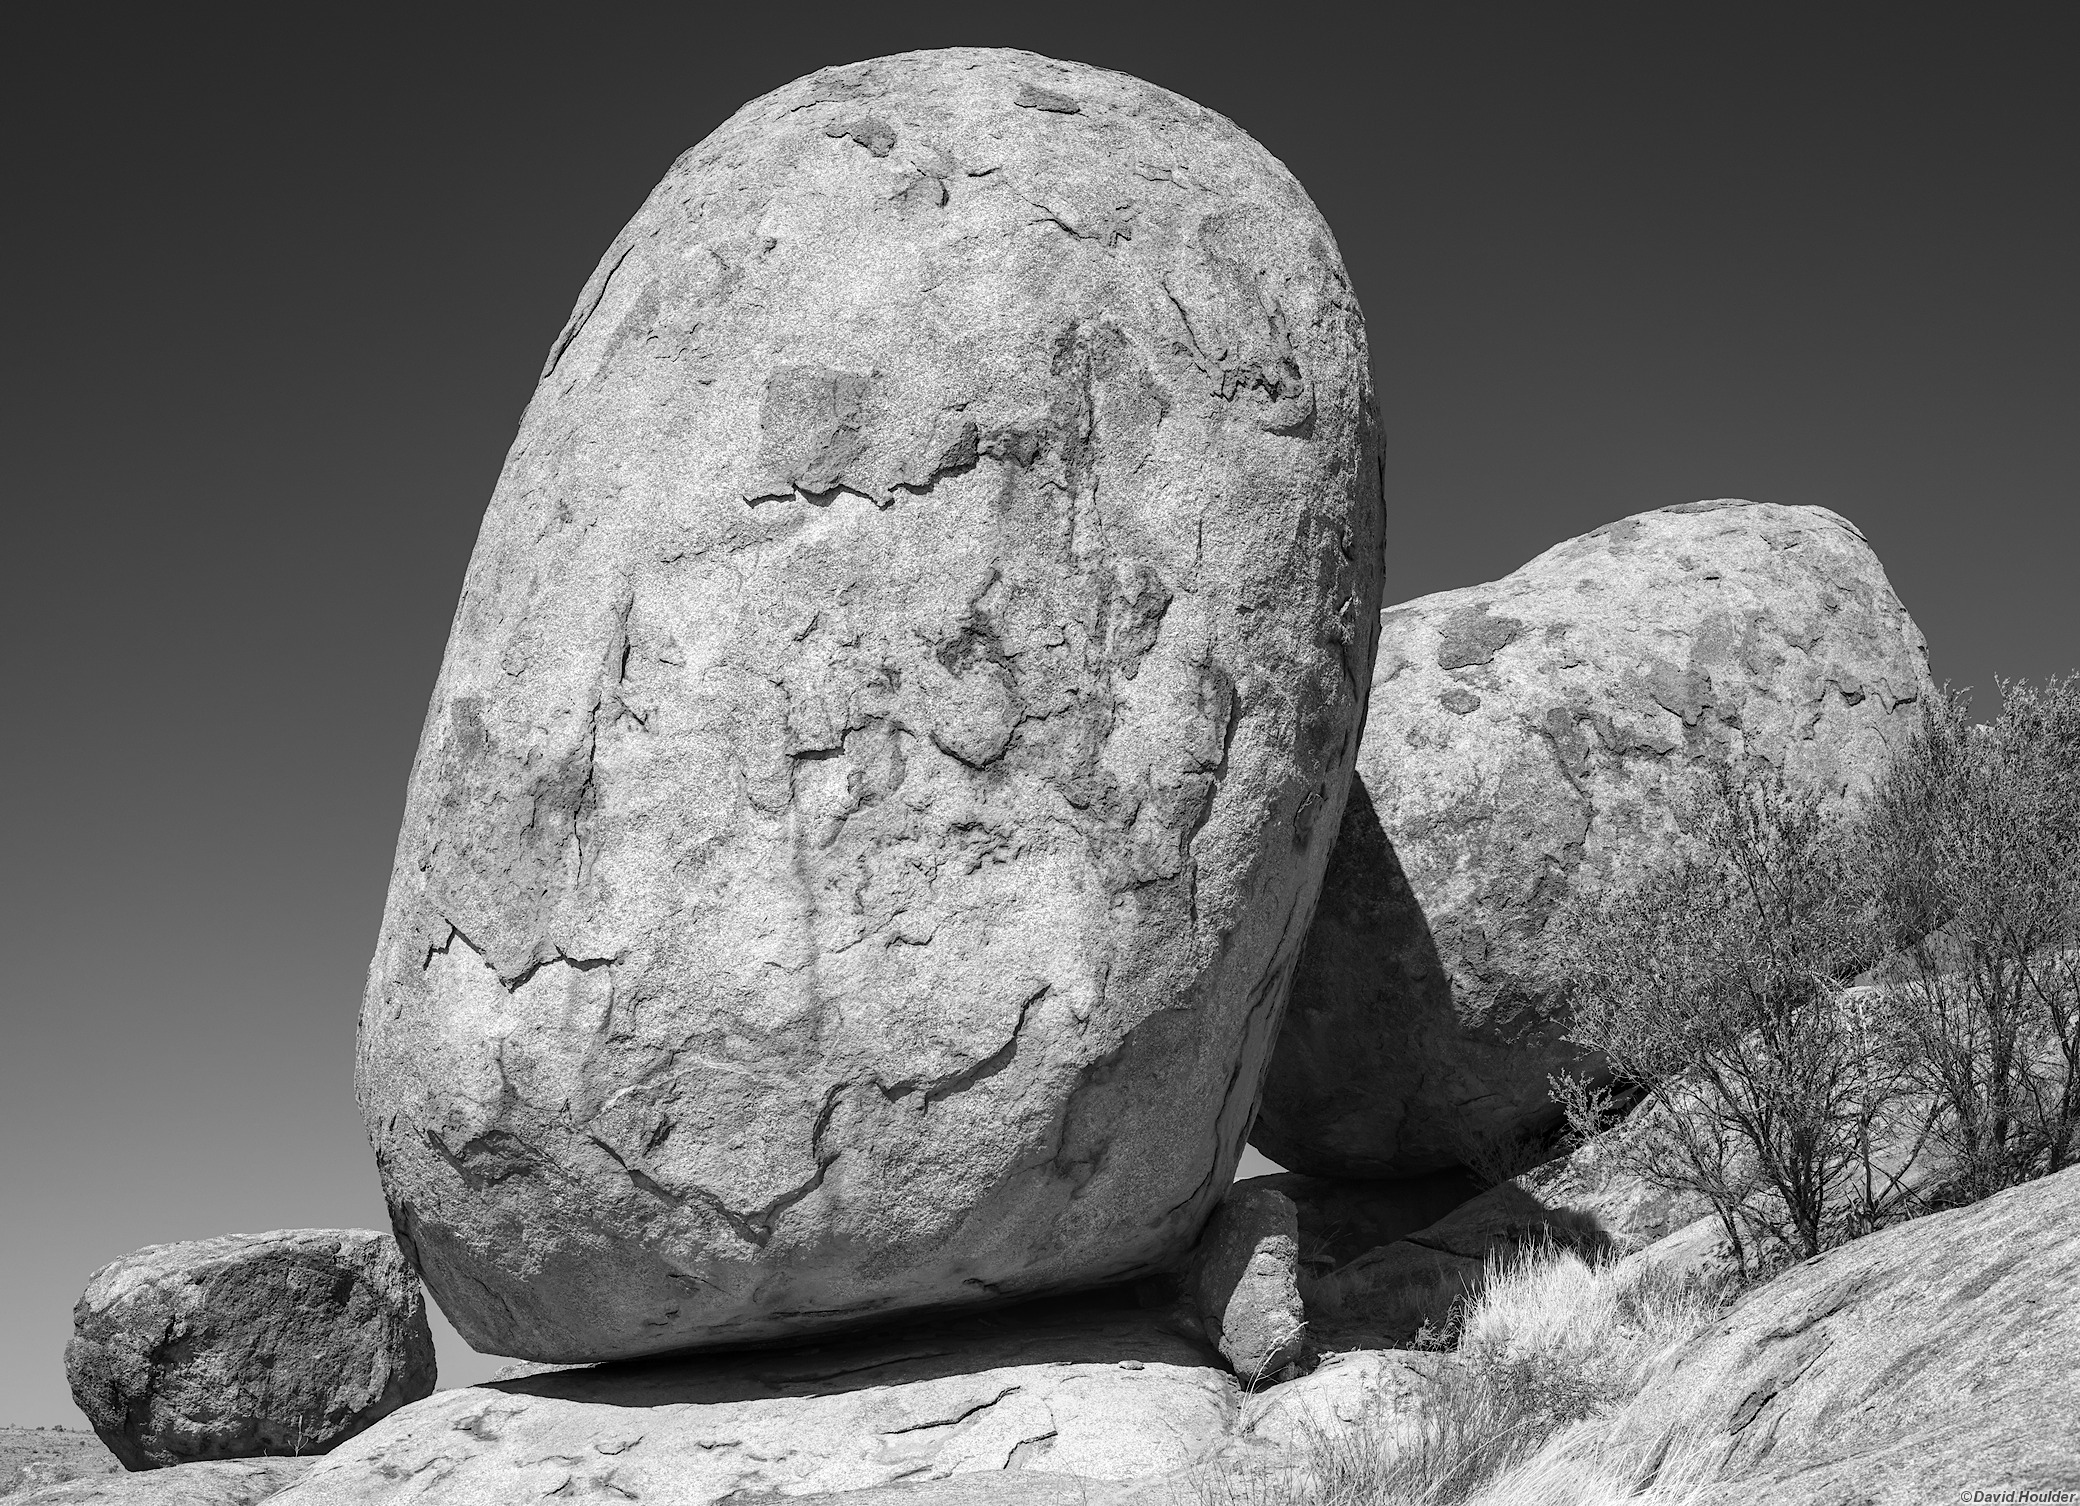 A large granite boulder with two smaller boulders either side lit by direct sunlight